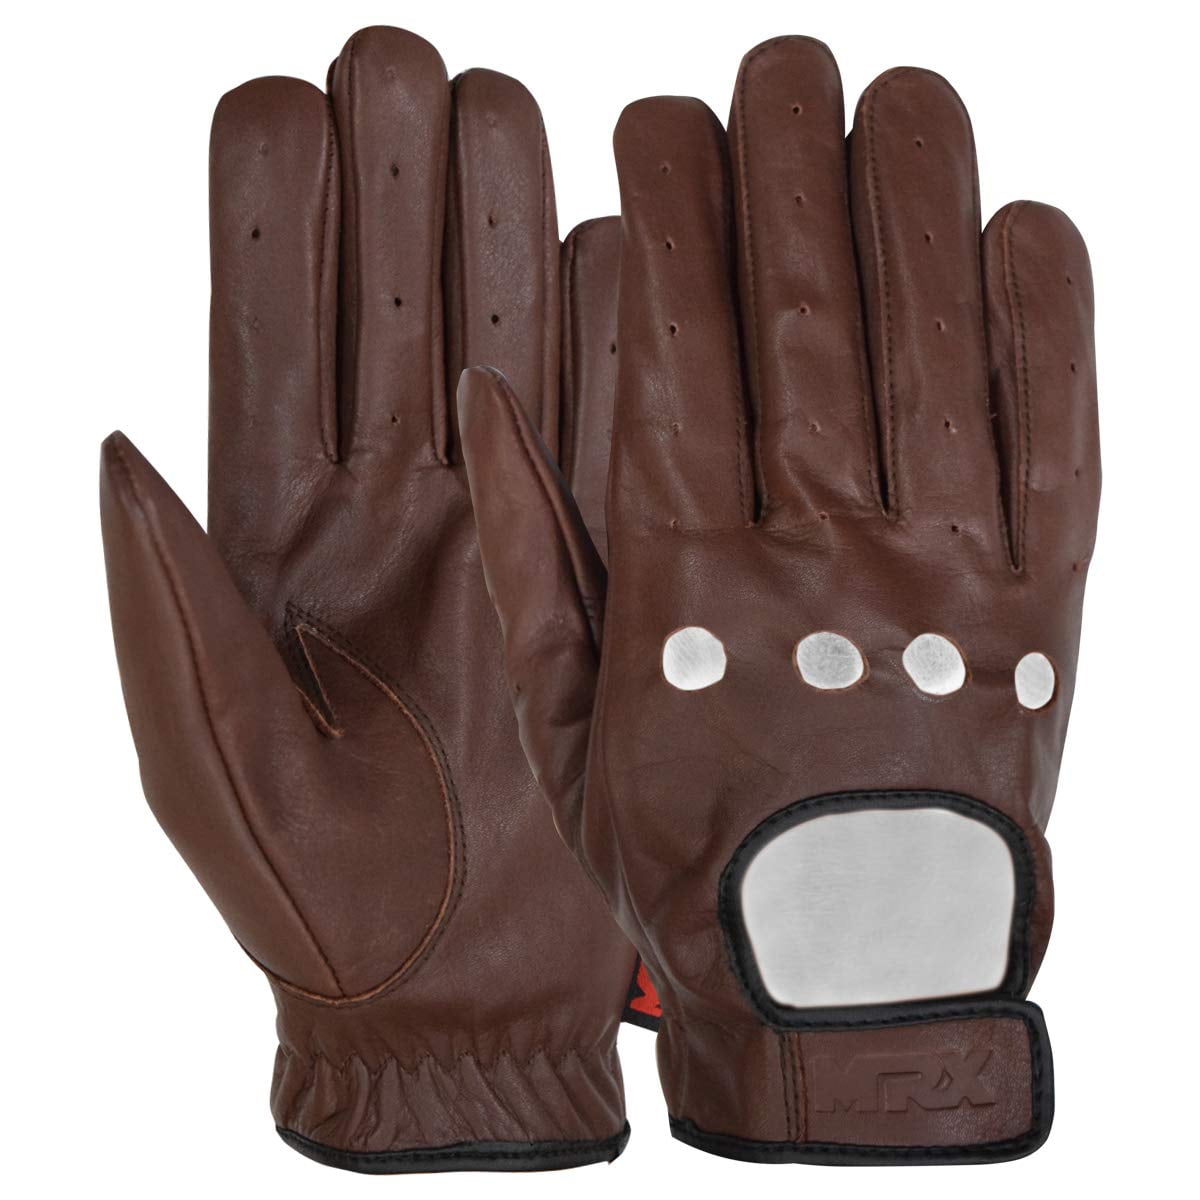 AK Classic Real Soft Touch Full Grain Leather Horse Ridding Glove Accessories Gloves & Mittens Sports Gloves 